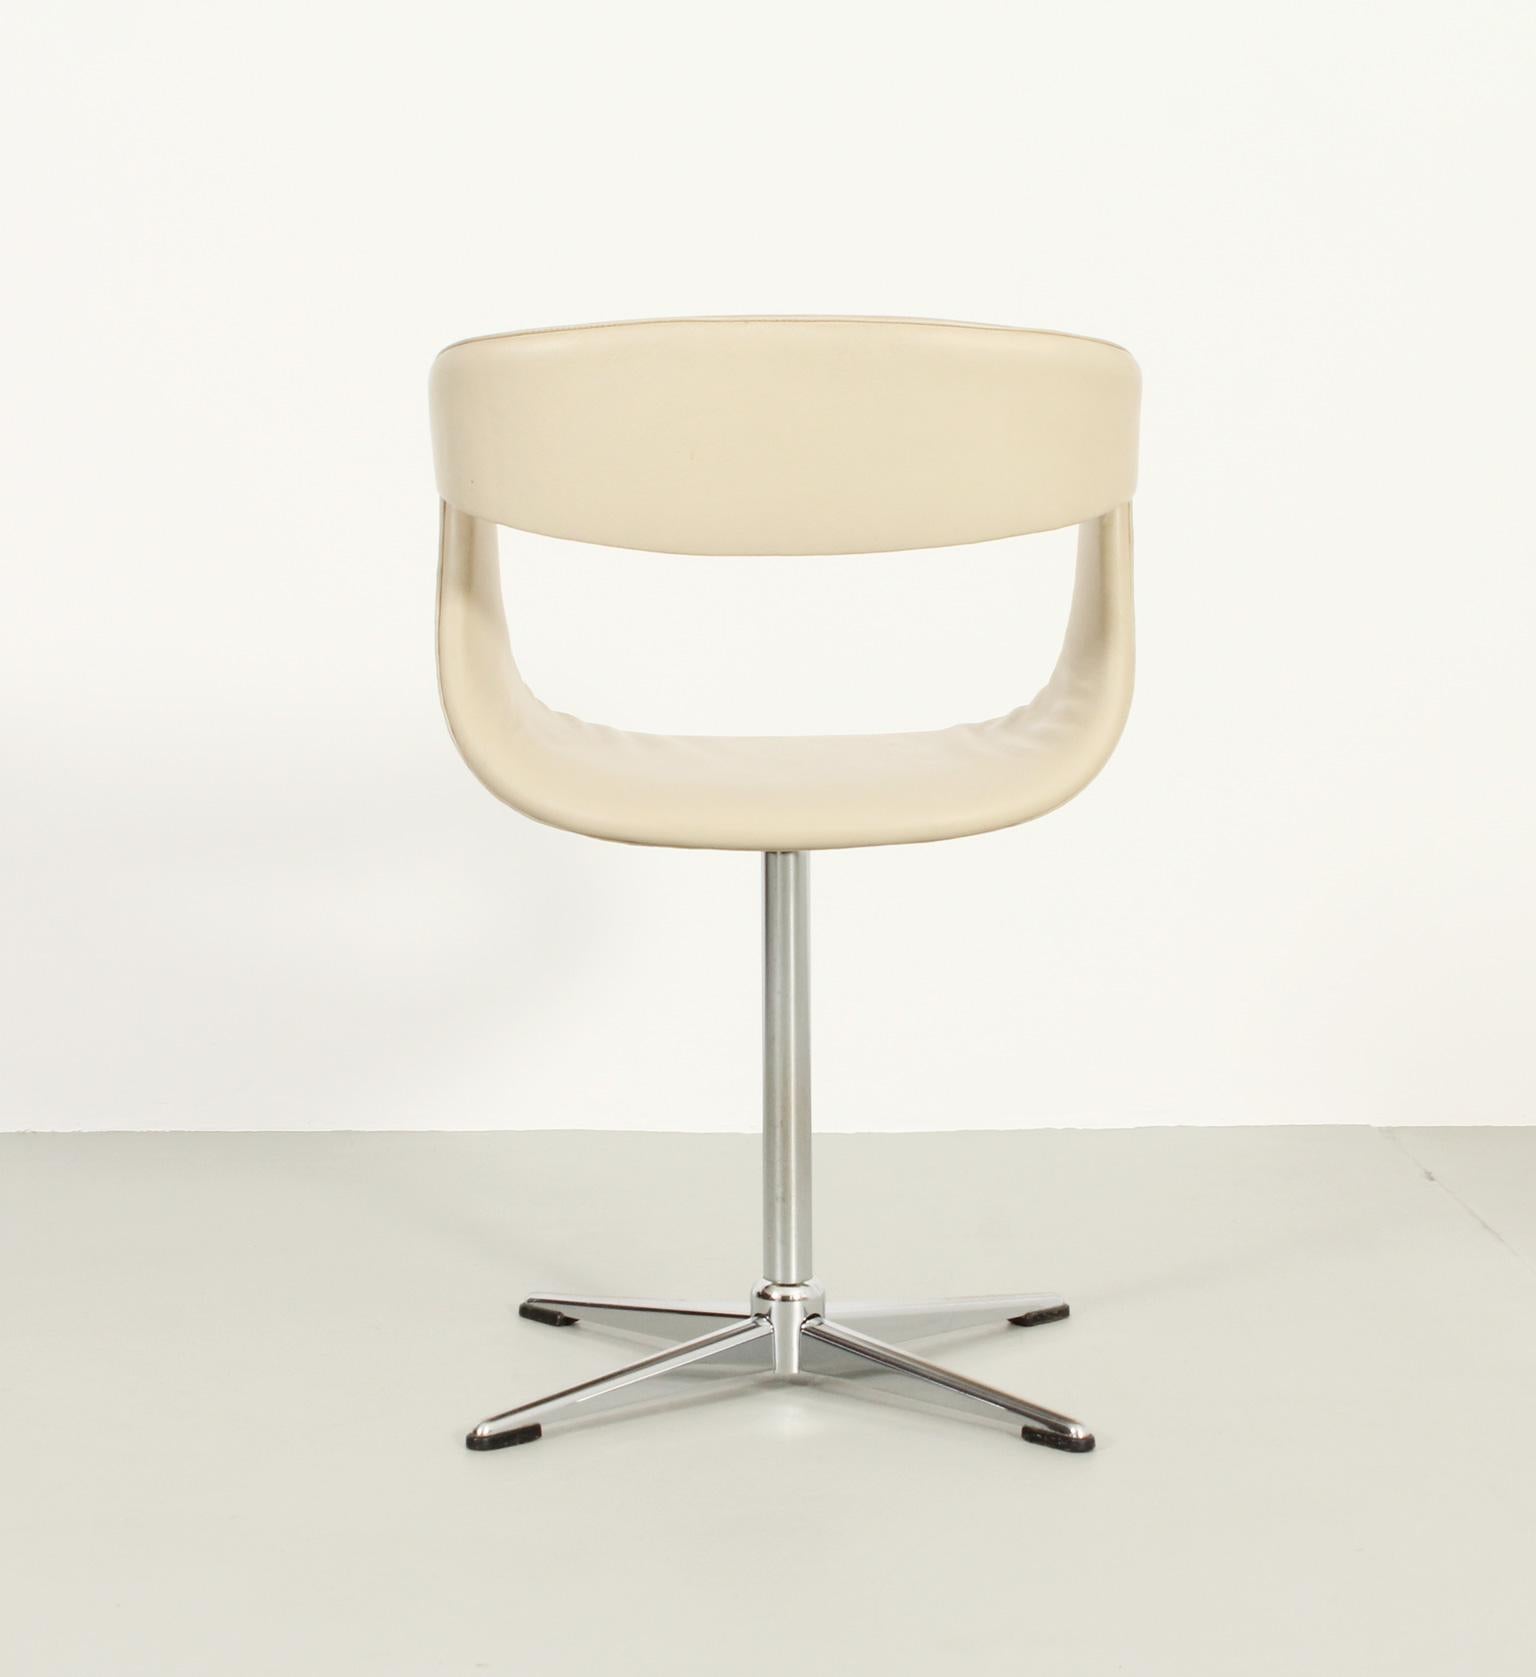 Office Swivel Chair in Cream Leather, France, 1960's For Sale 3